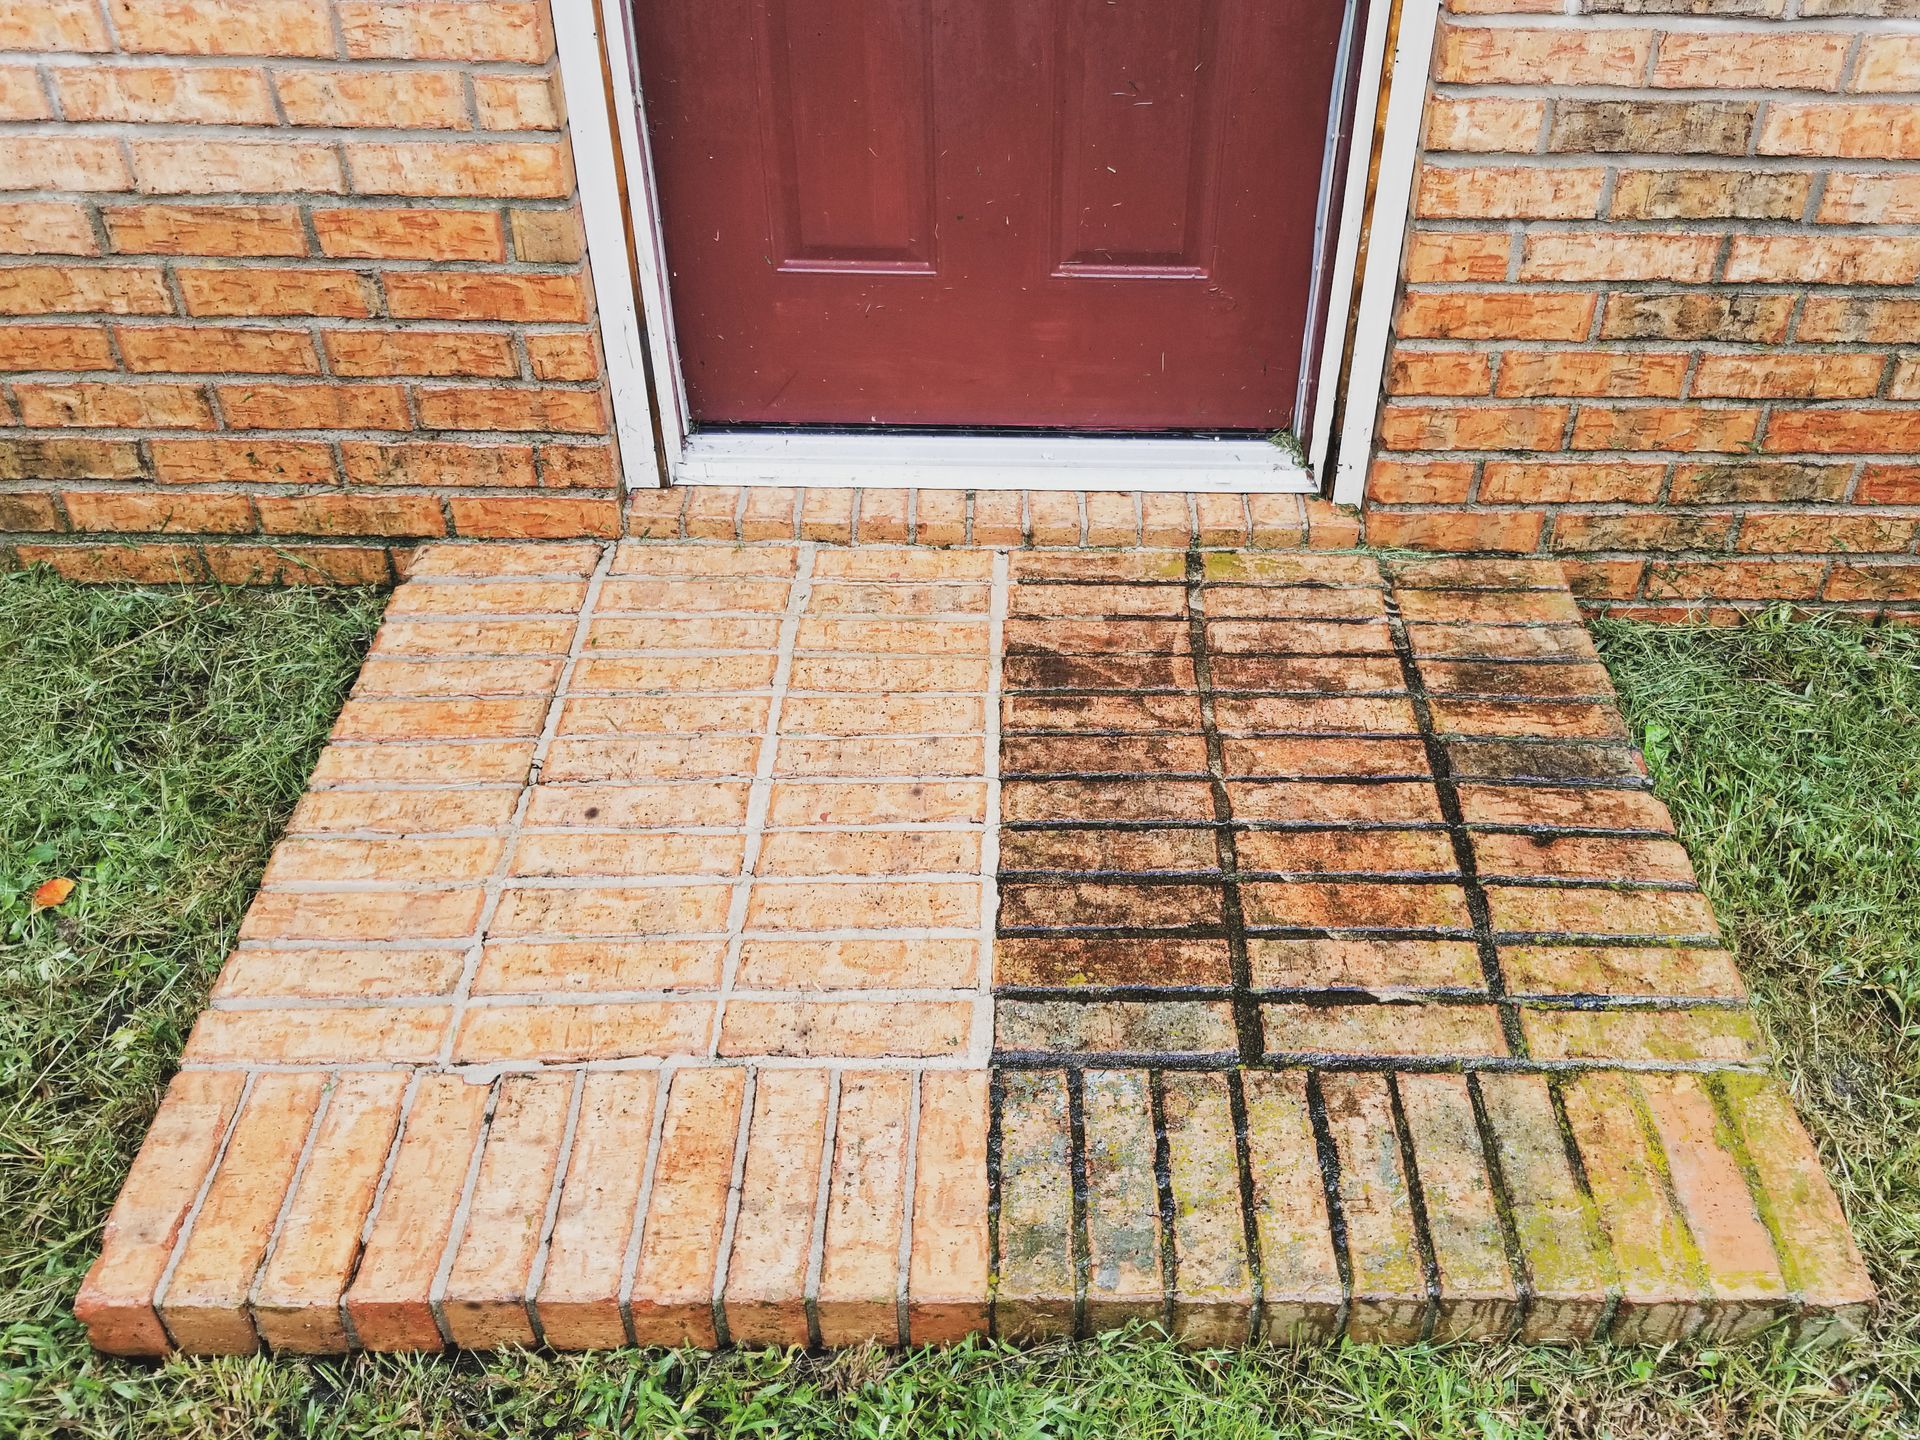 A before and after picture of a brick walkway next to a door.